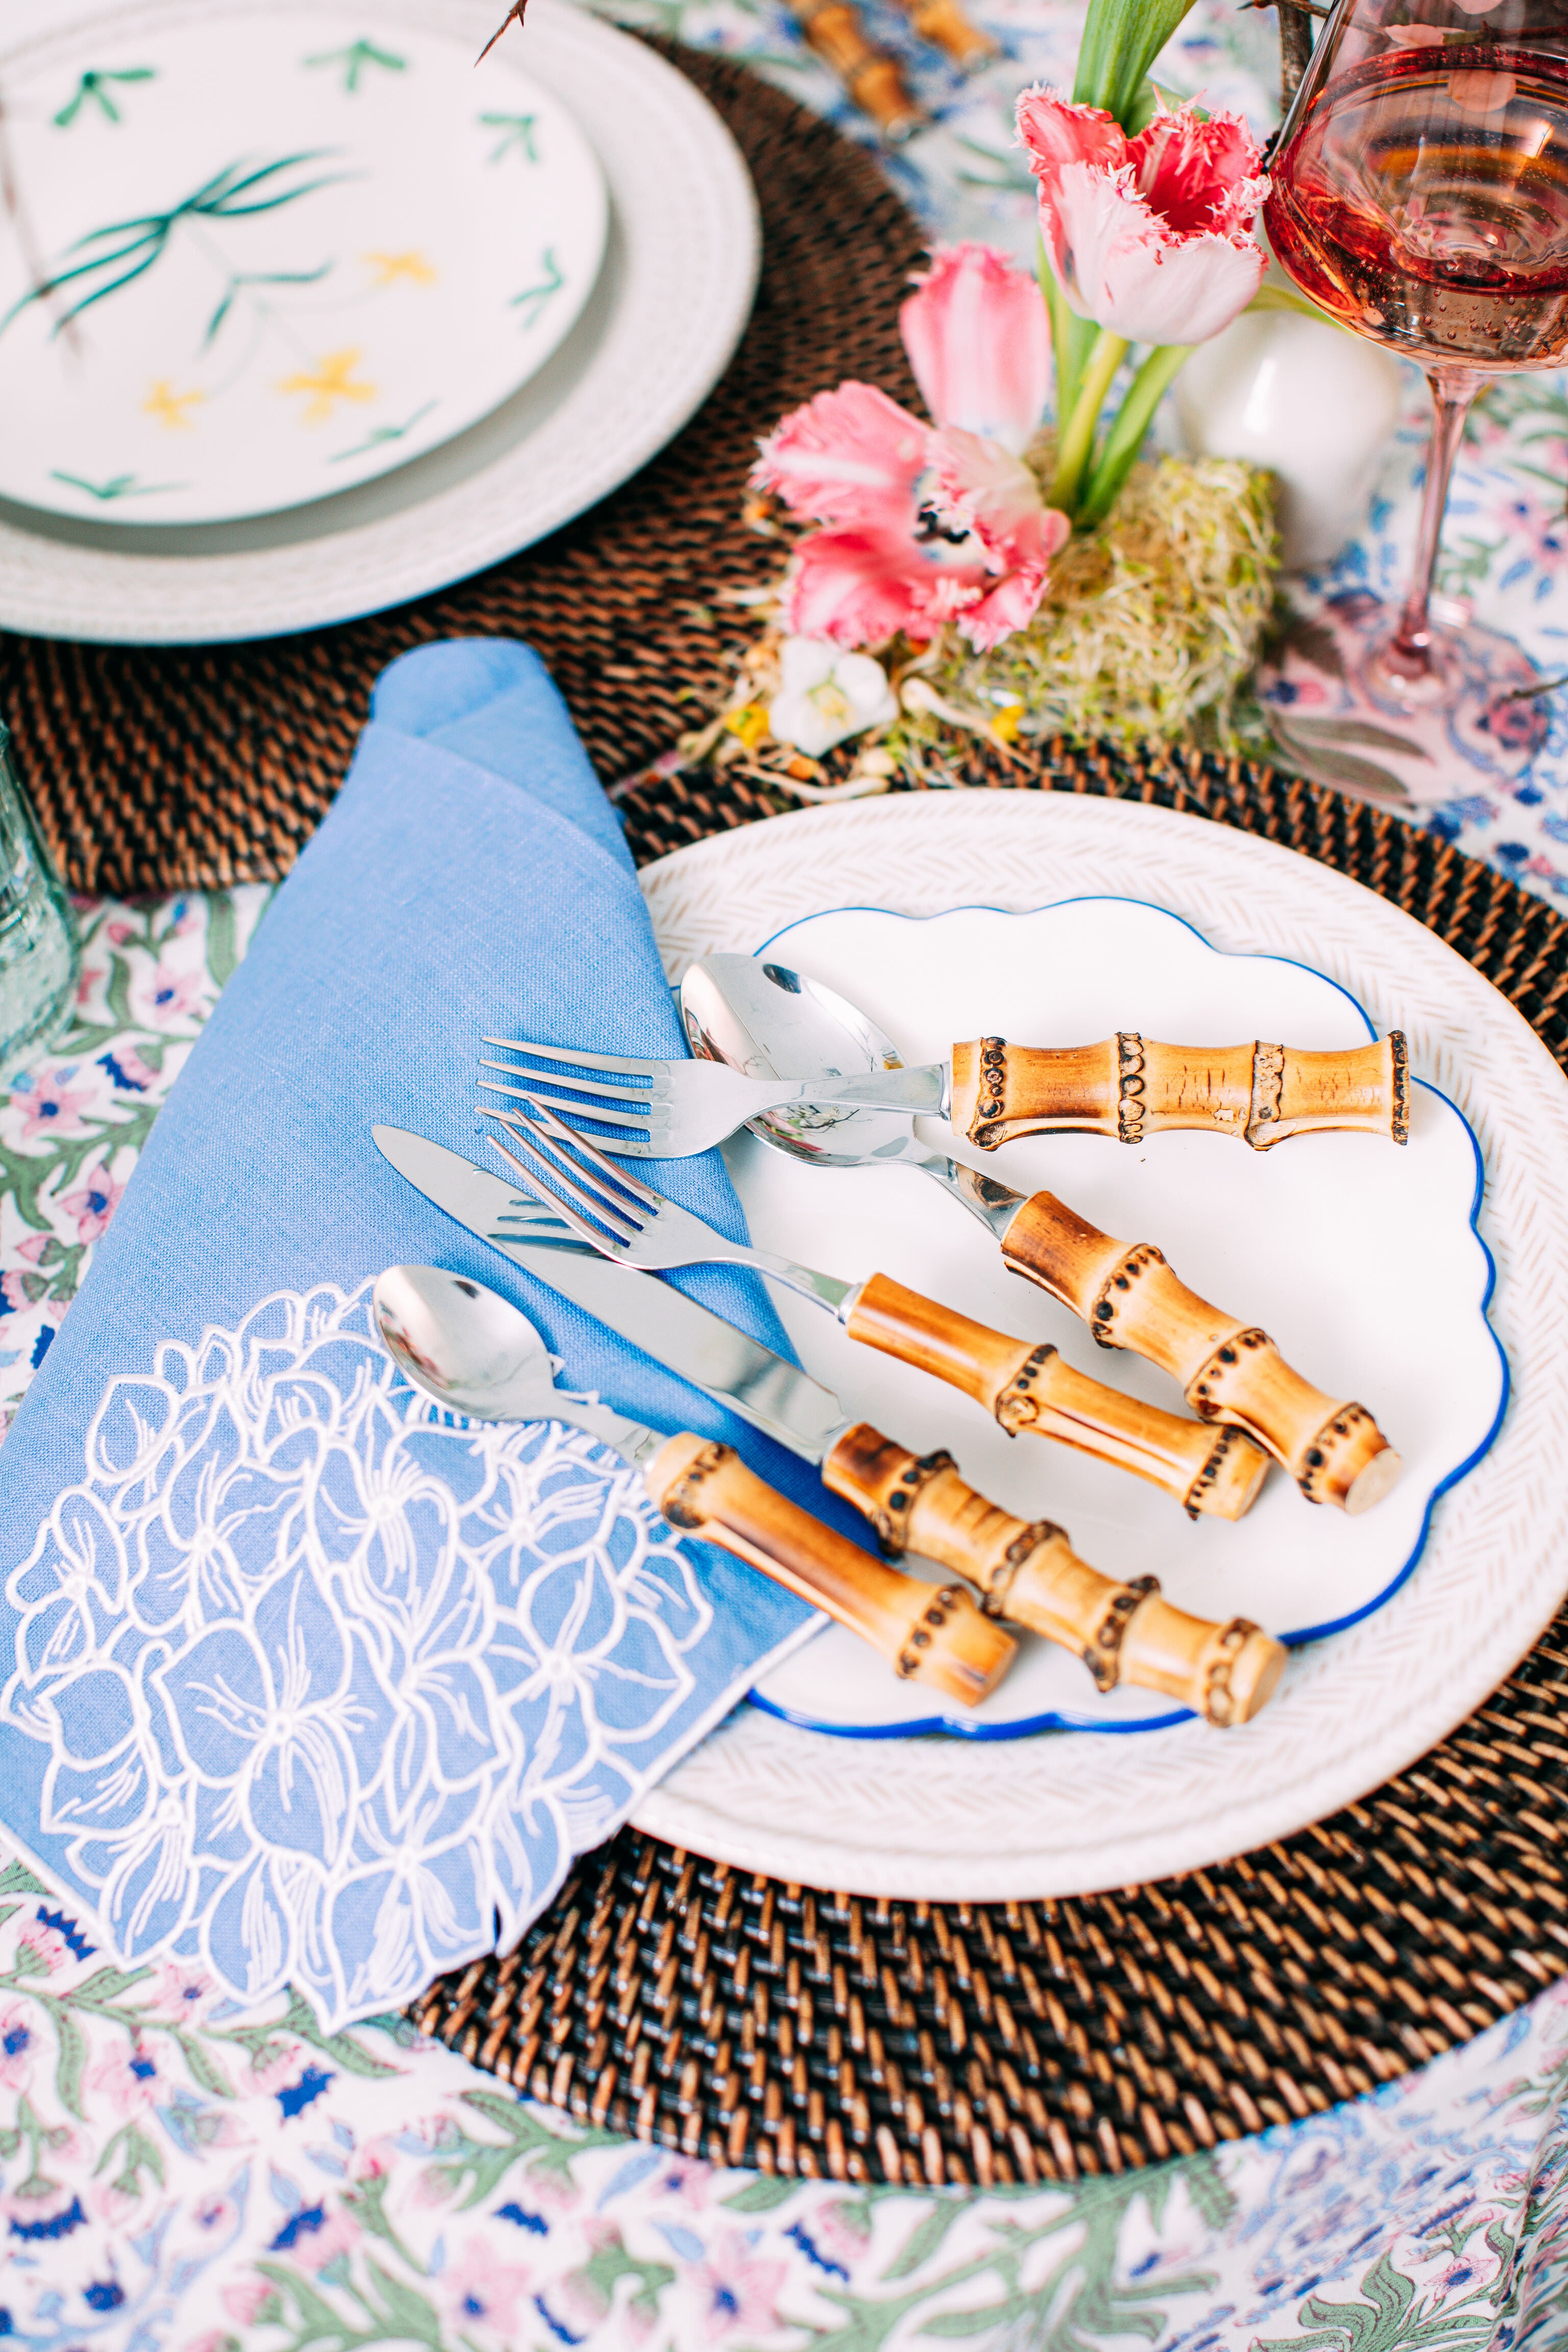 Bamboo 5 Piece Place Setting